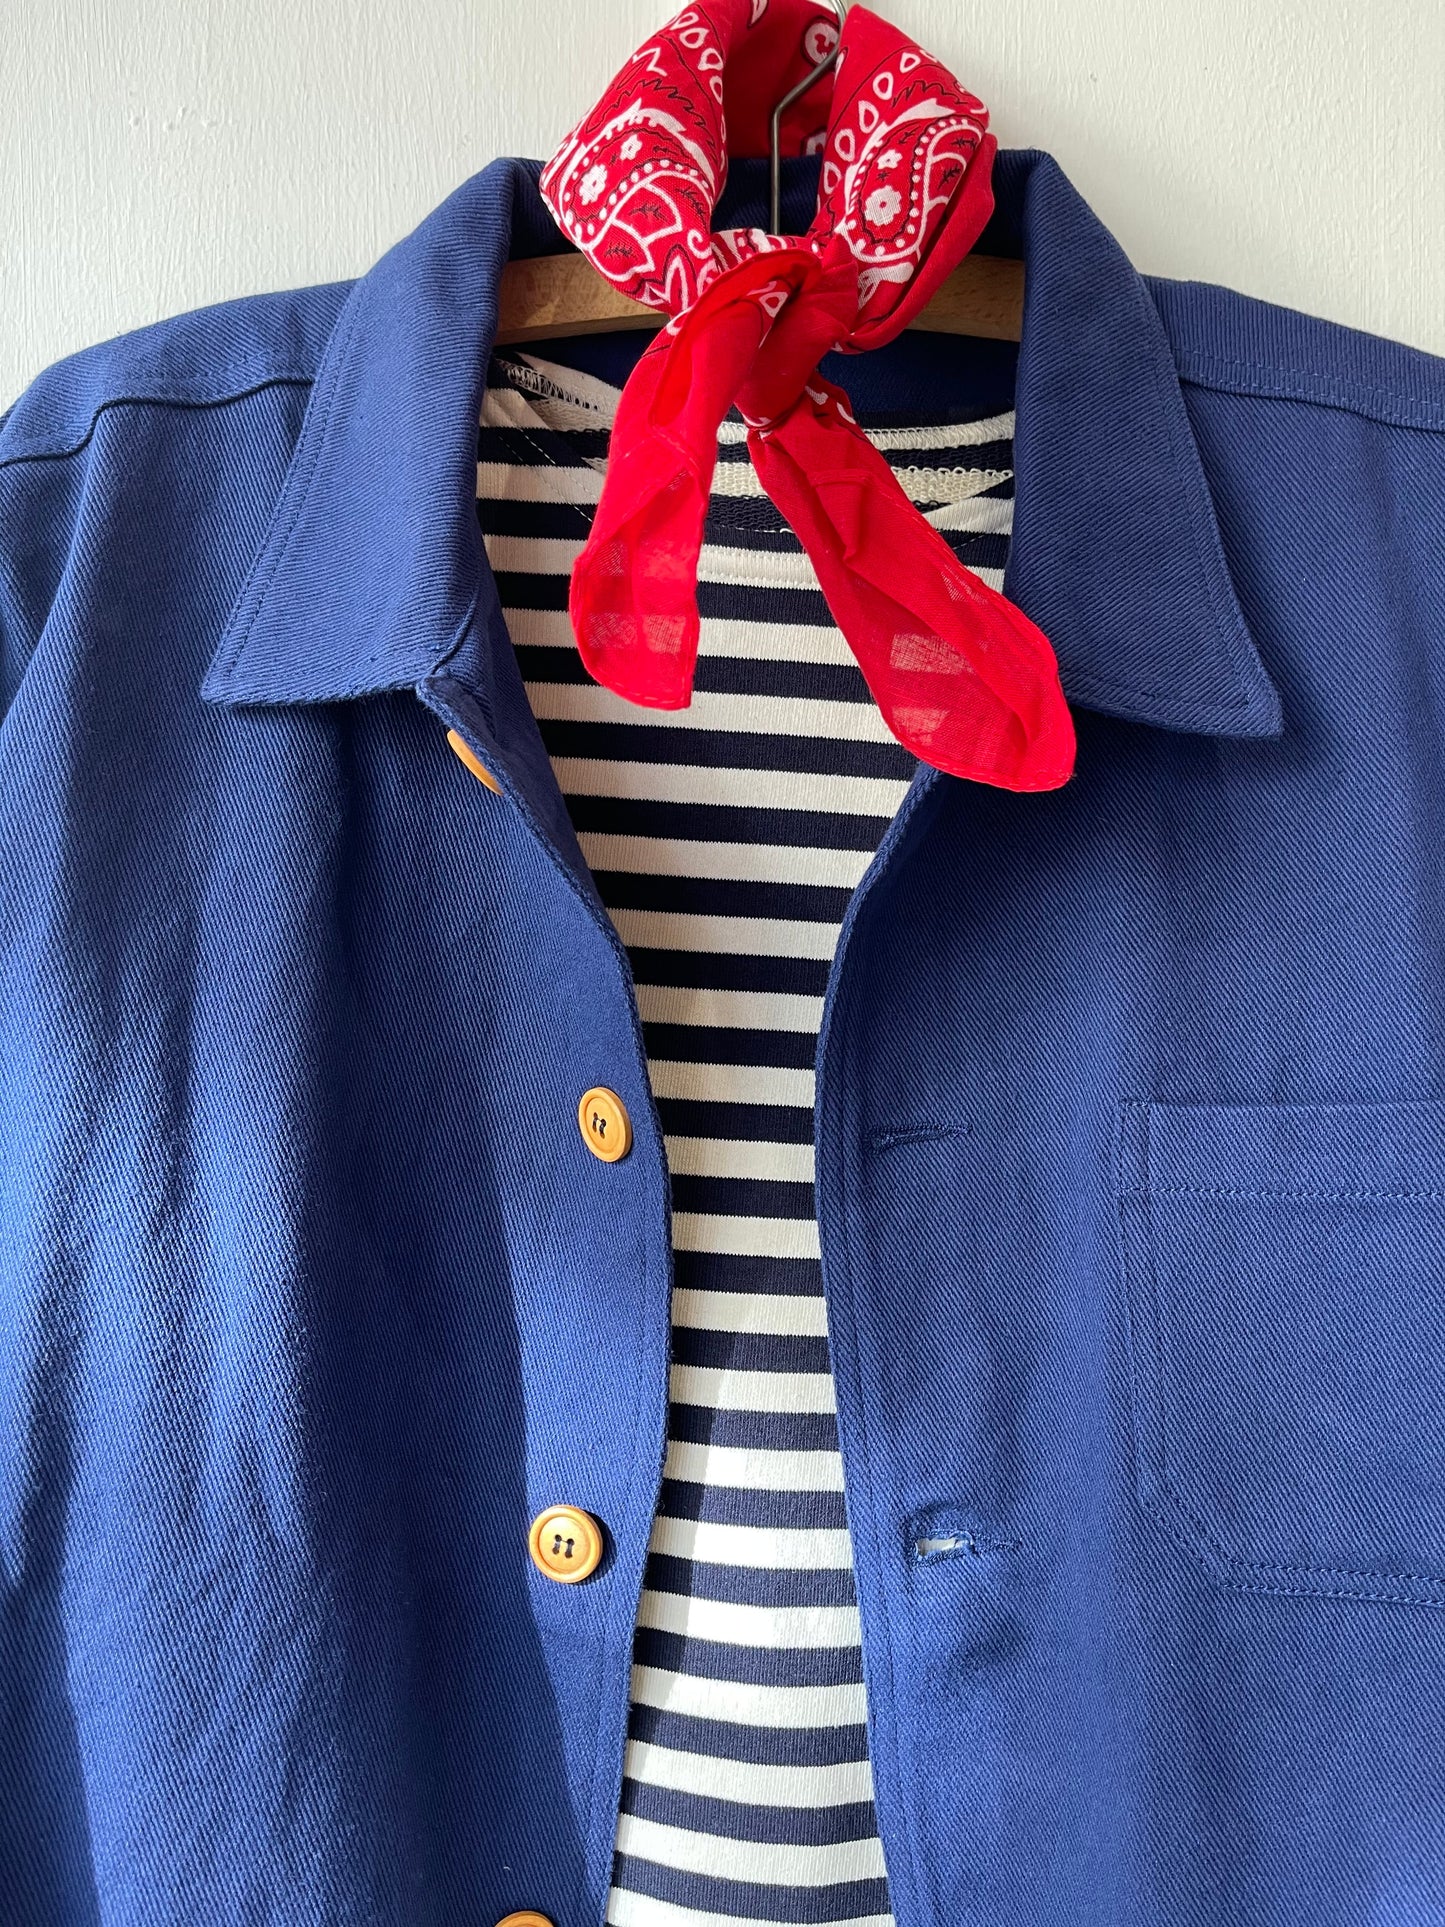 French Chore Jacket Indigo Wooden Buttons